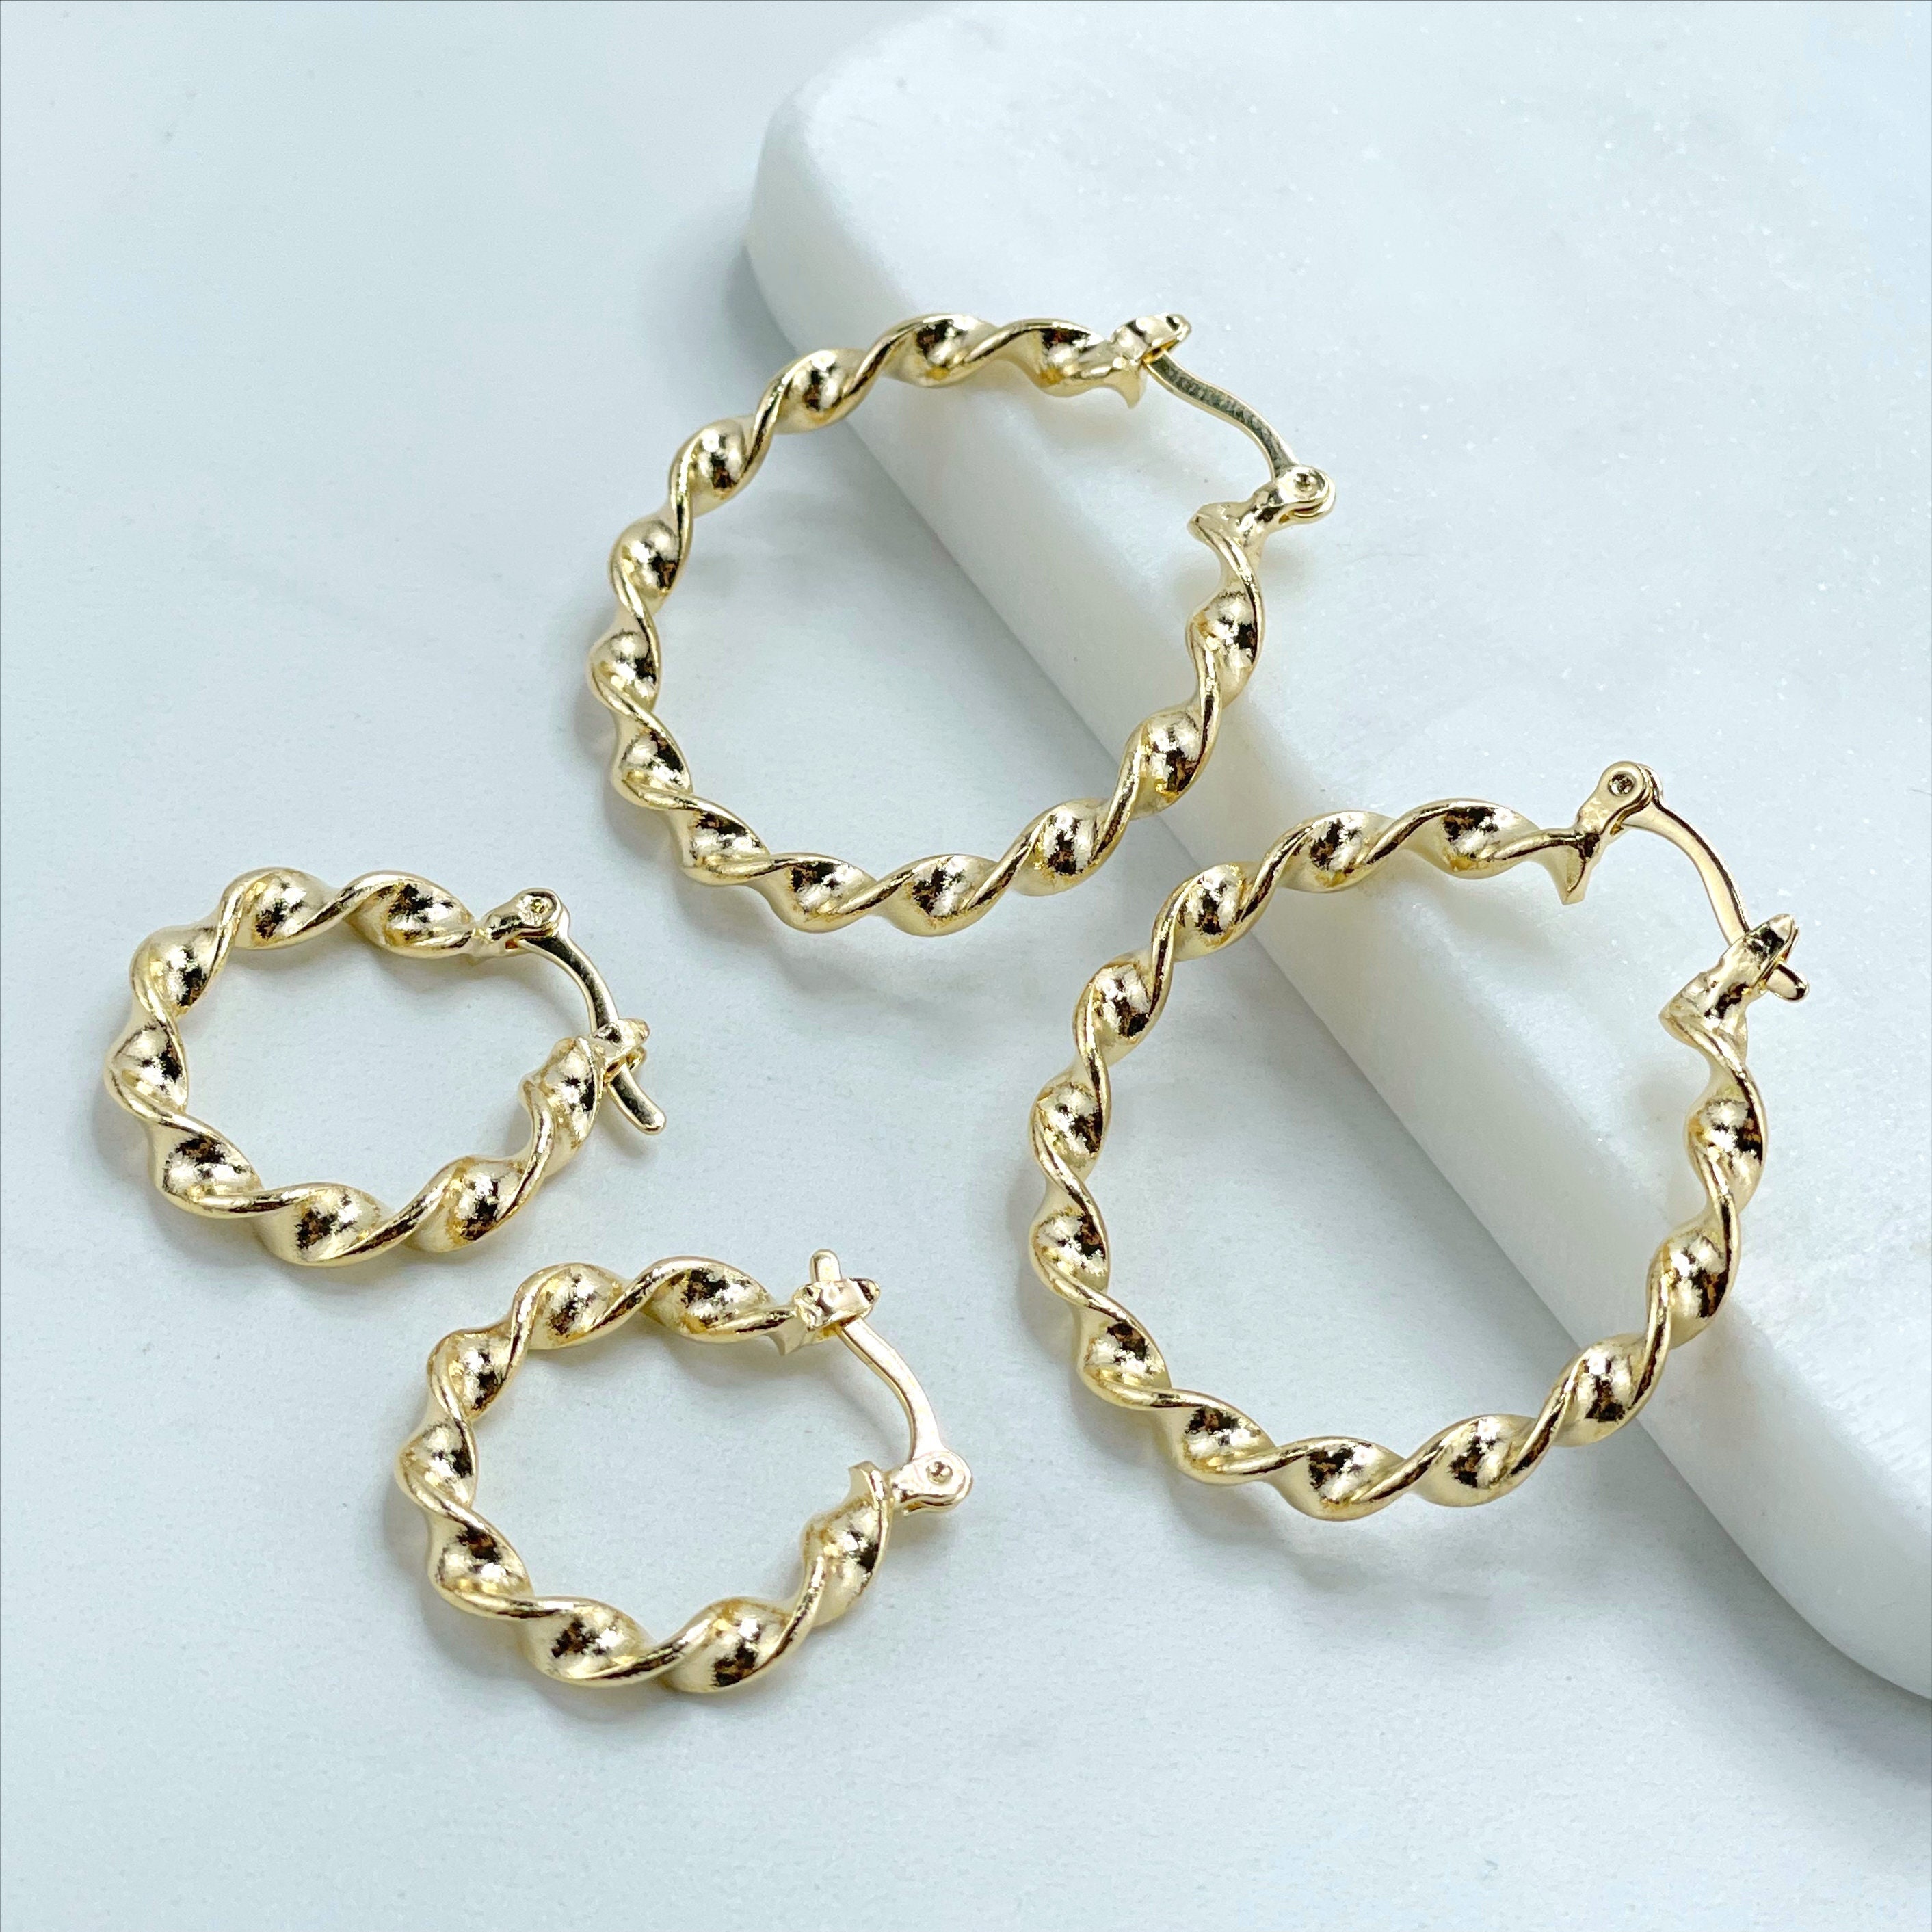 Gold Filled Swirl Premium Earring Back, 3 Sizes - Wholesale Pricing,  (GF/705)